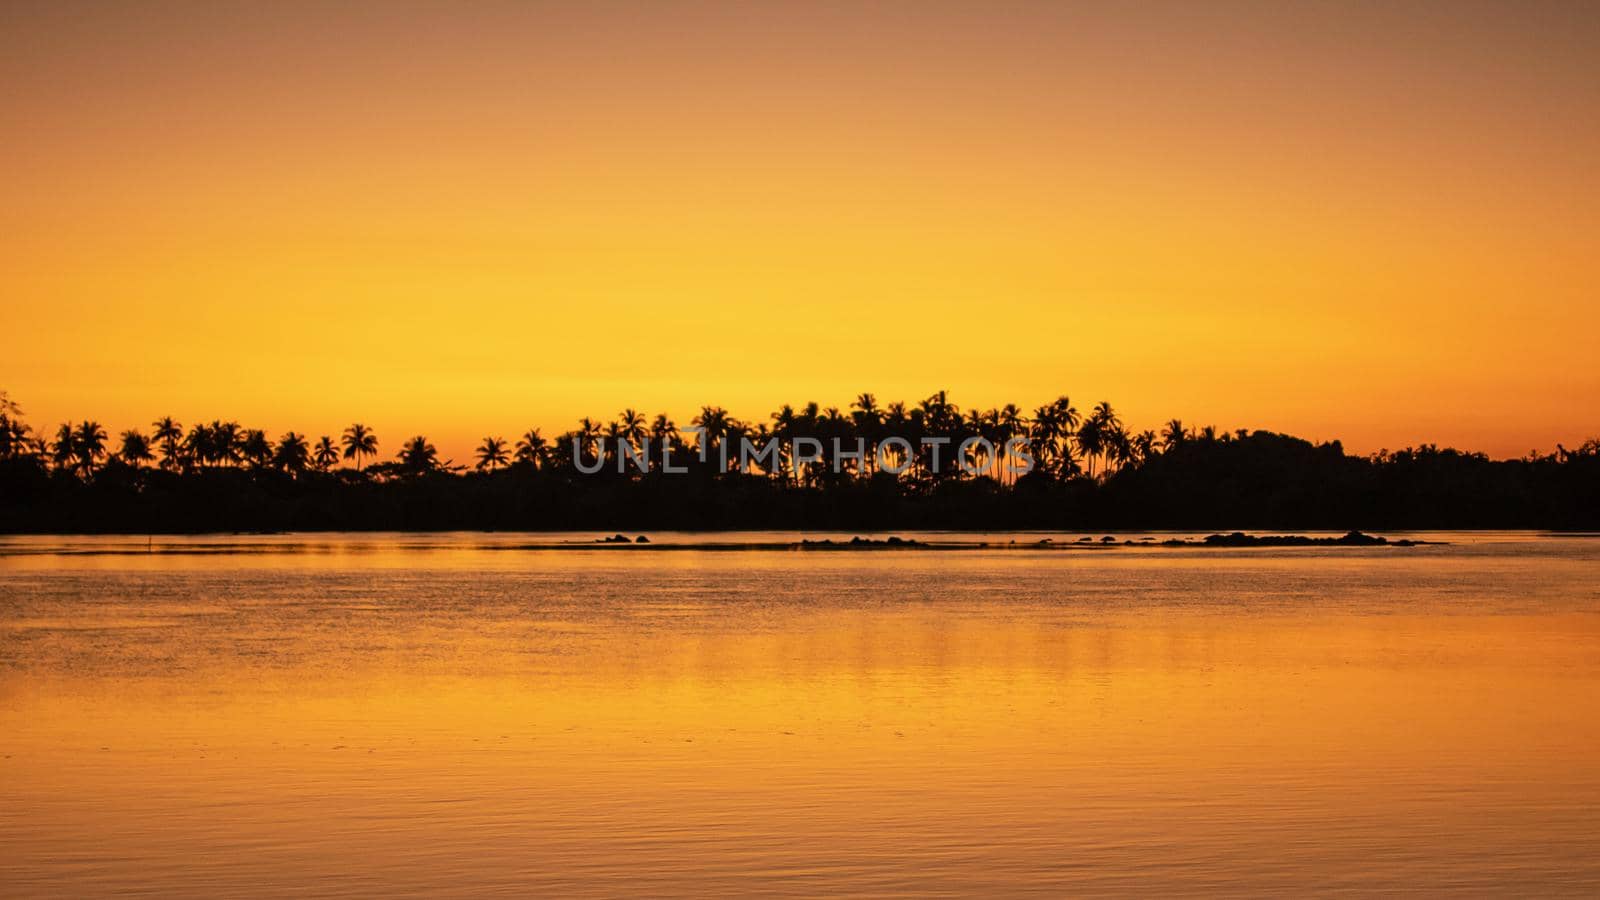 A bright orange sunset sky reflecting in the calm ocean with palm tree silhouettes in the background, Ngwesaung, Irrawaddy, western Myanmar